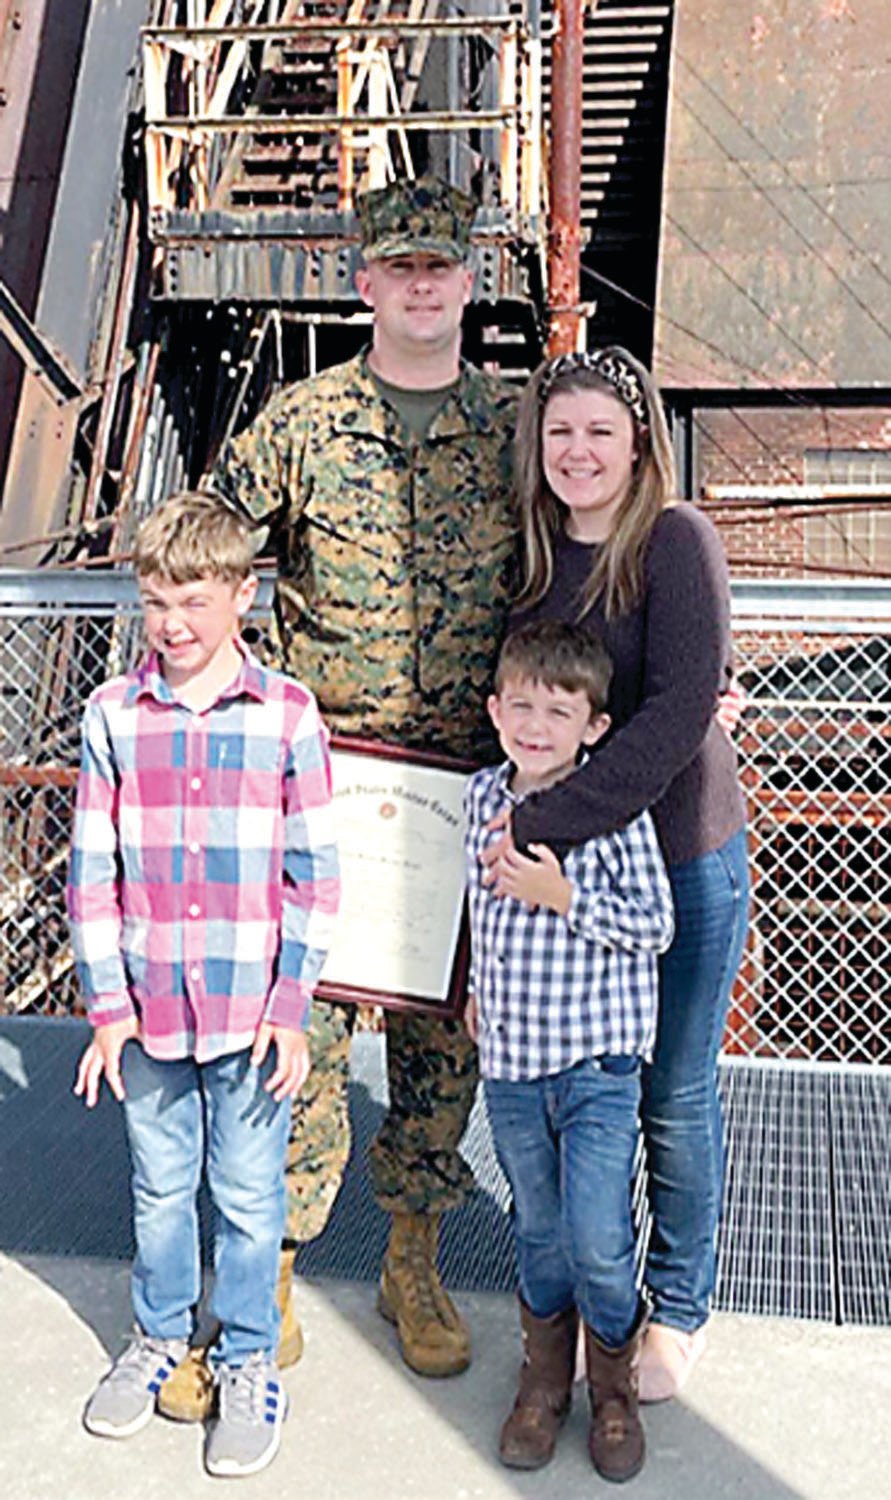 Gunnery Sgt. Cameron McNeill and his family.